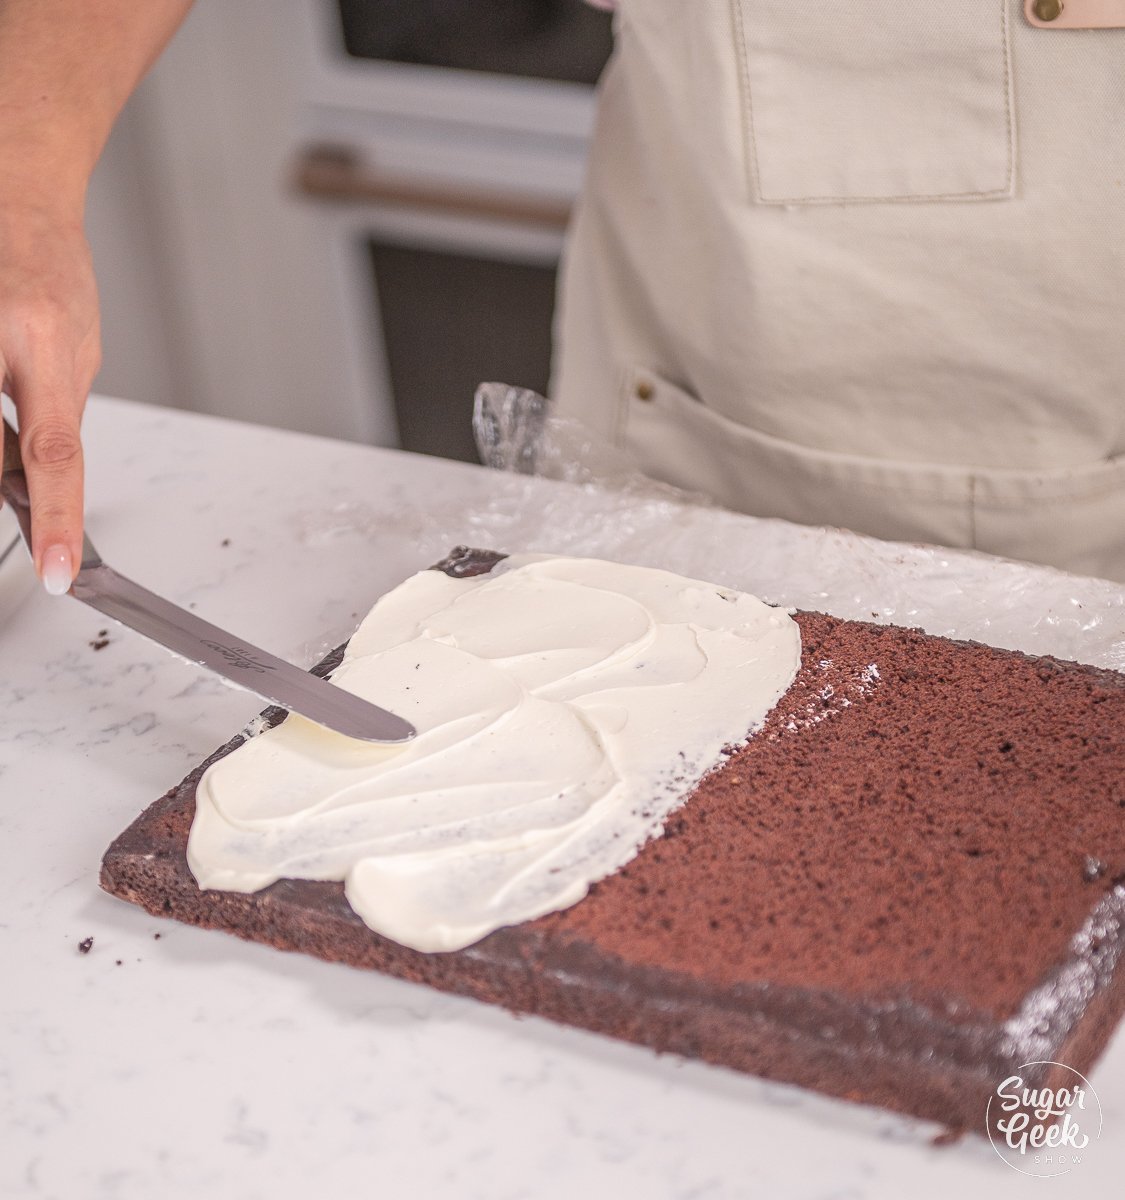 smoothing buttercream on top of chocolate cake